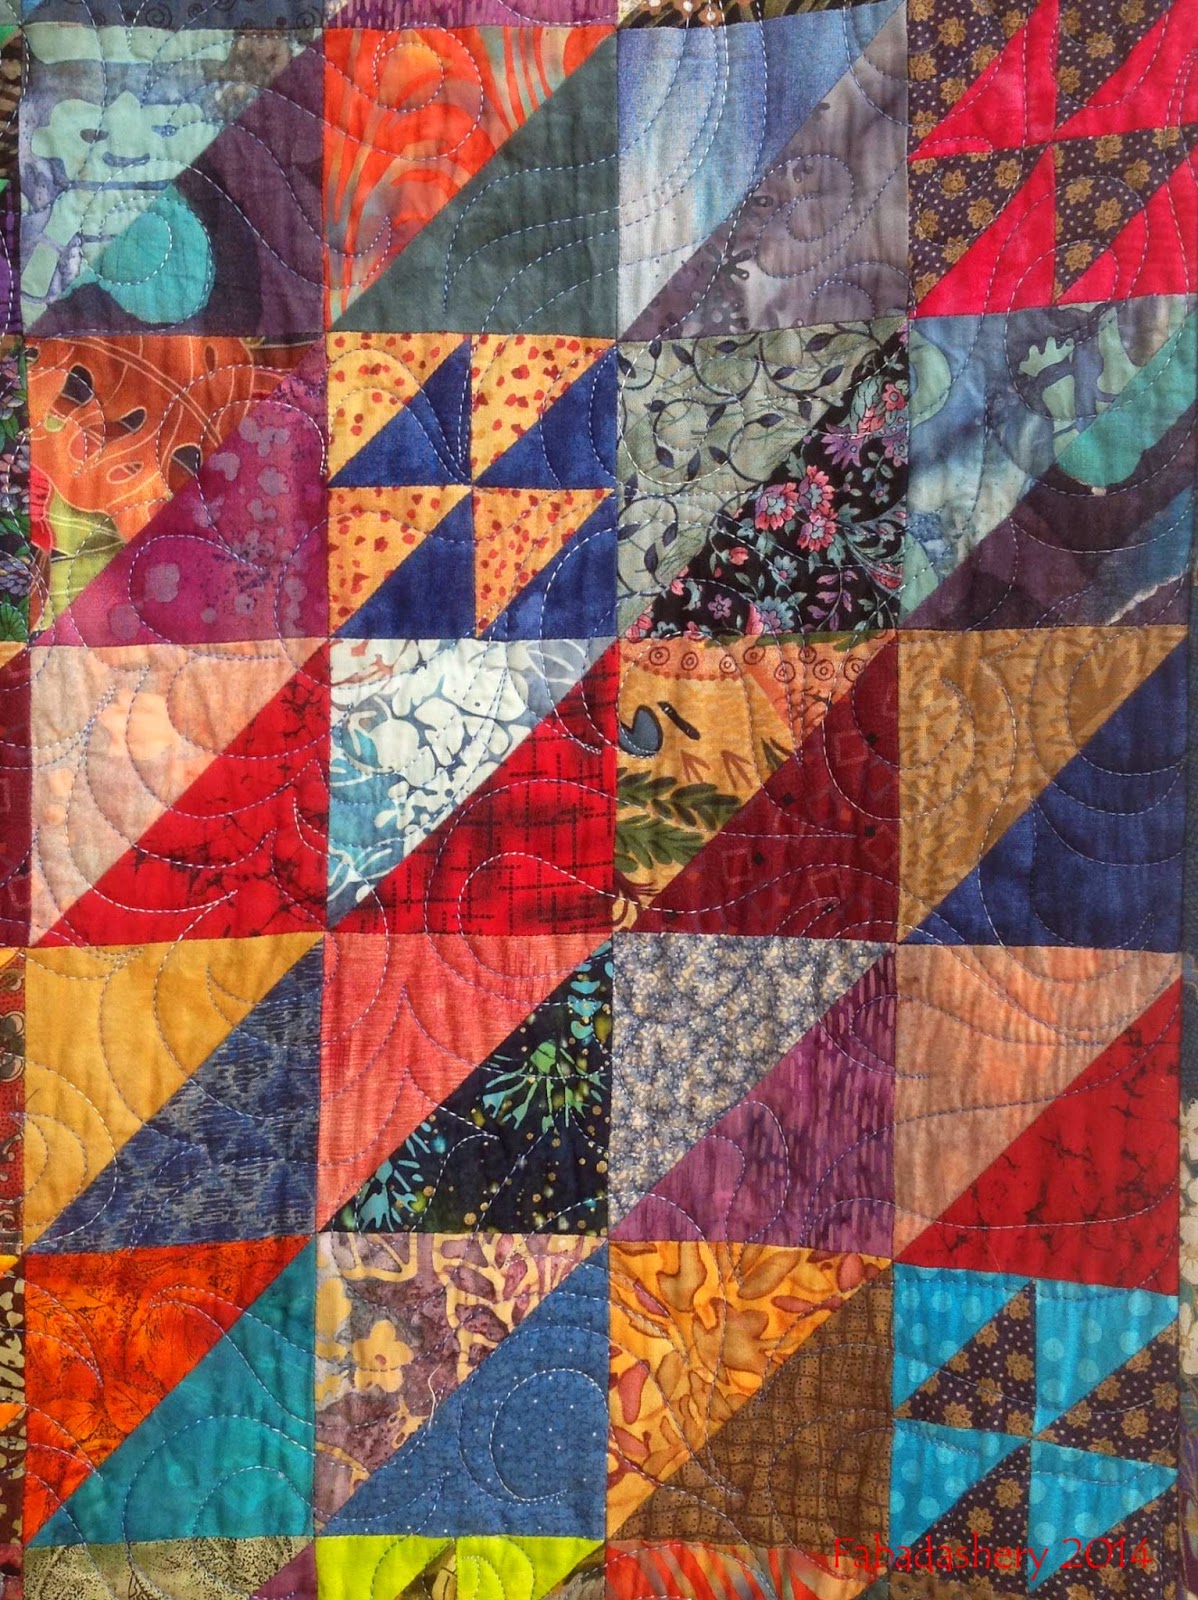 'Strictly Triangles' Quilt by Katherine Guerrier